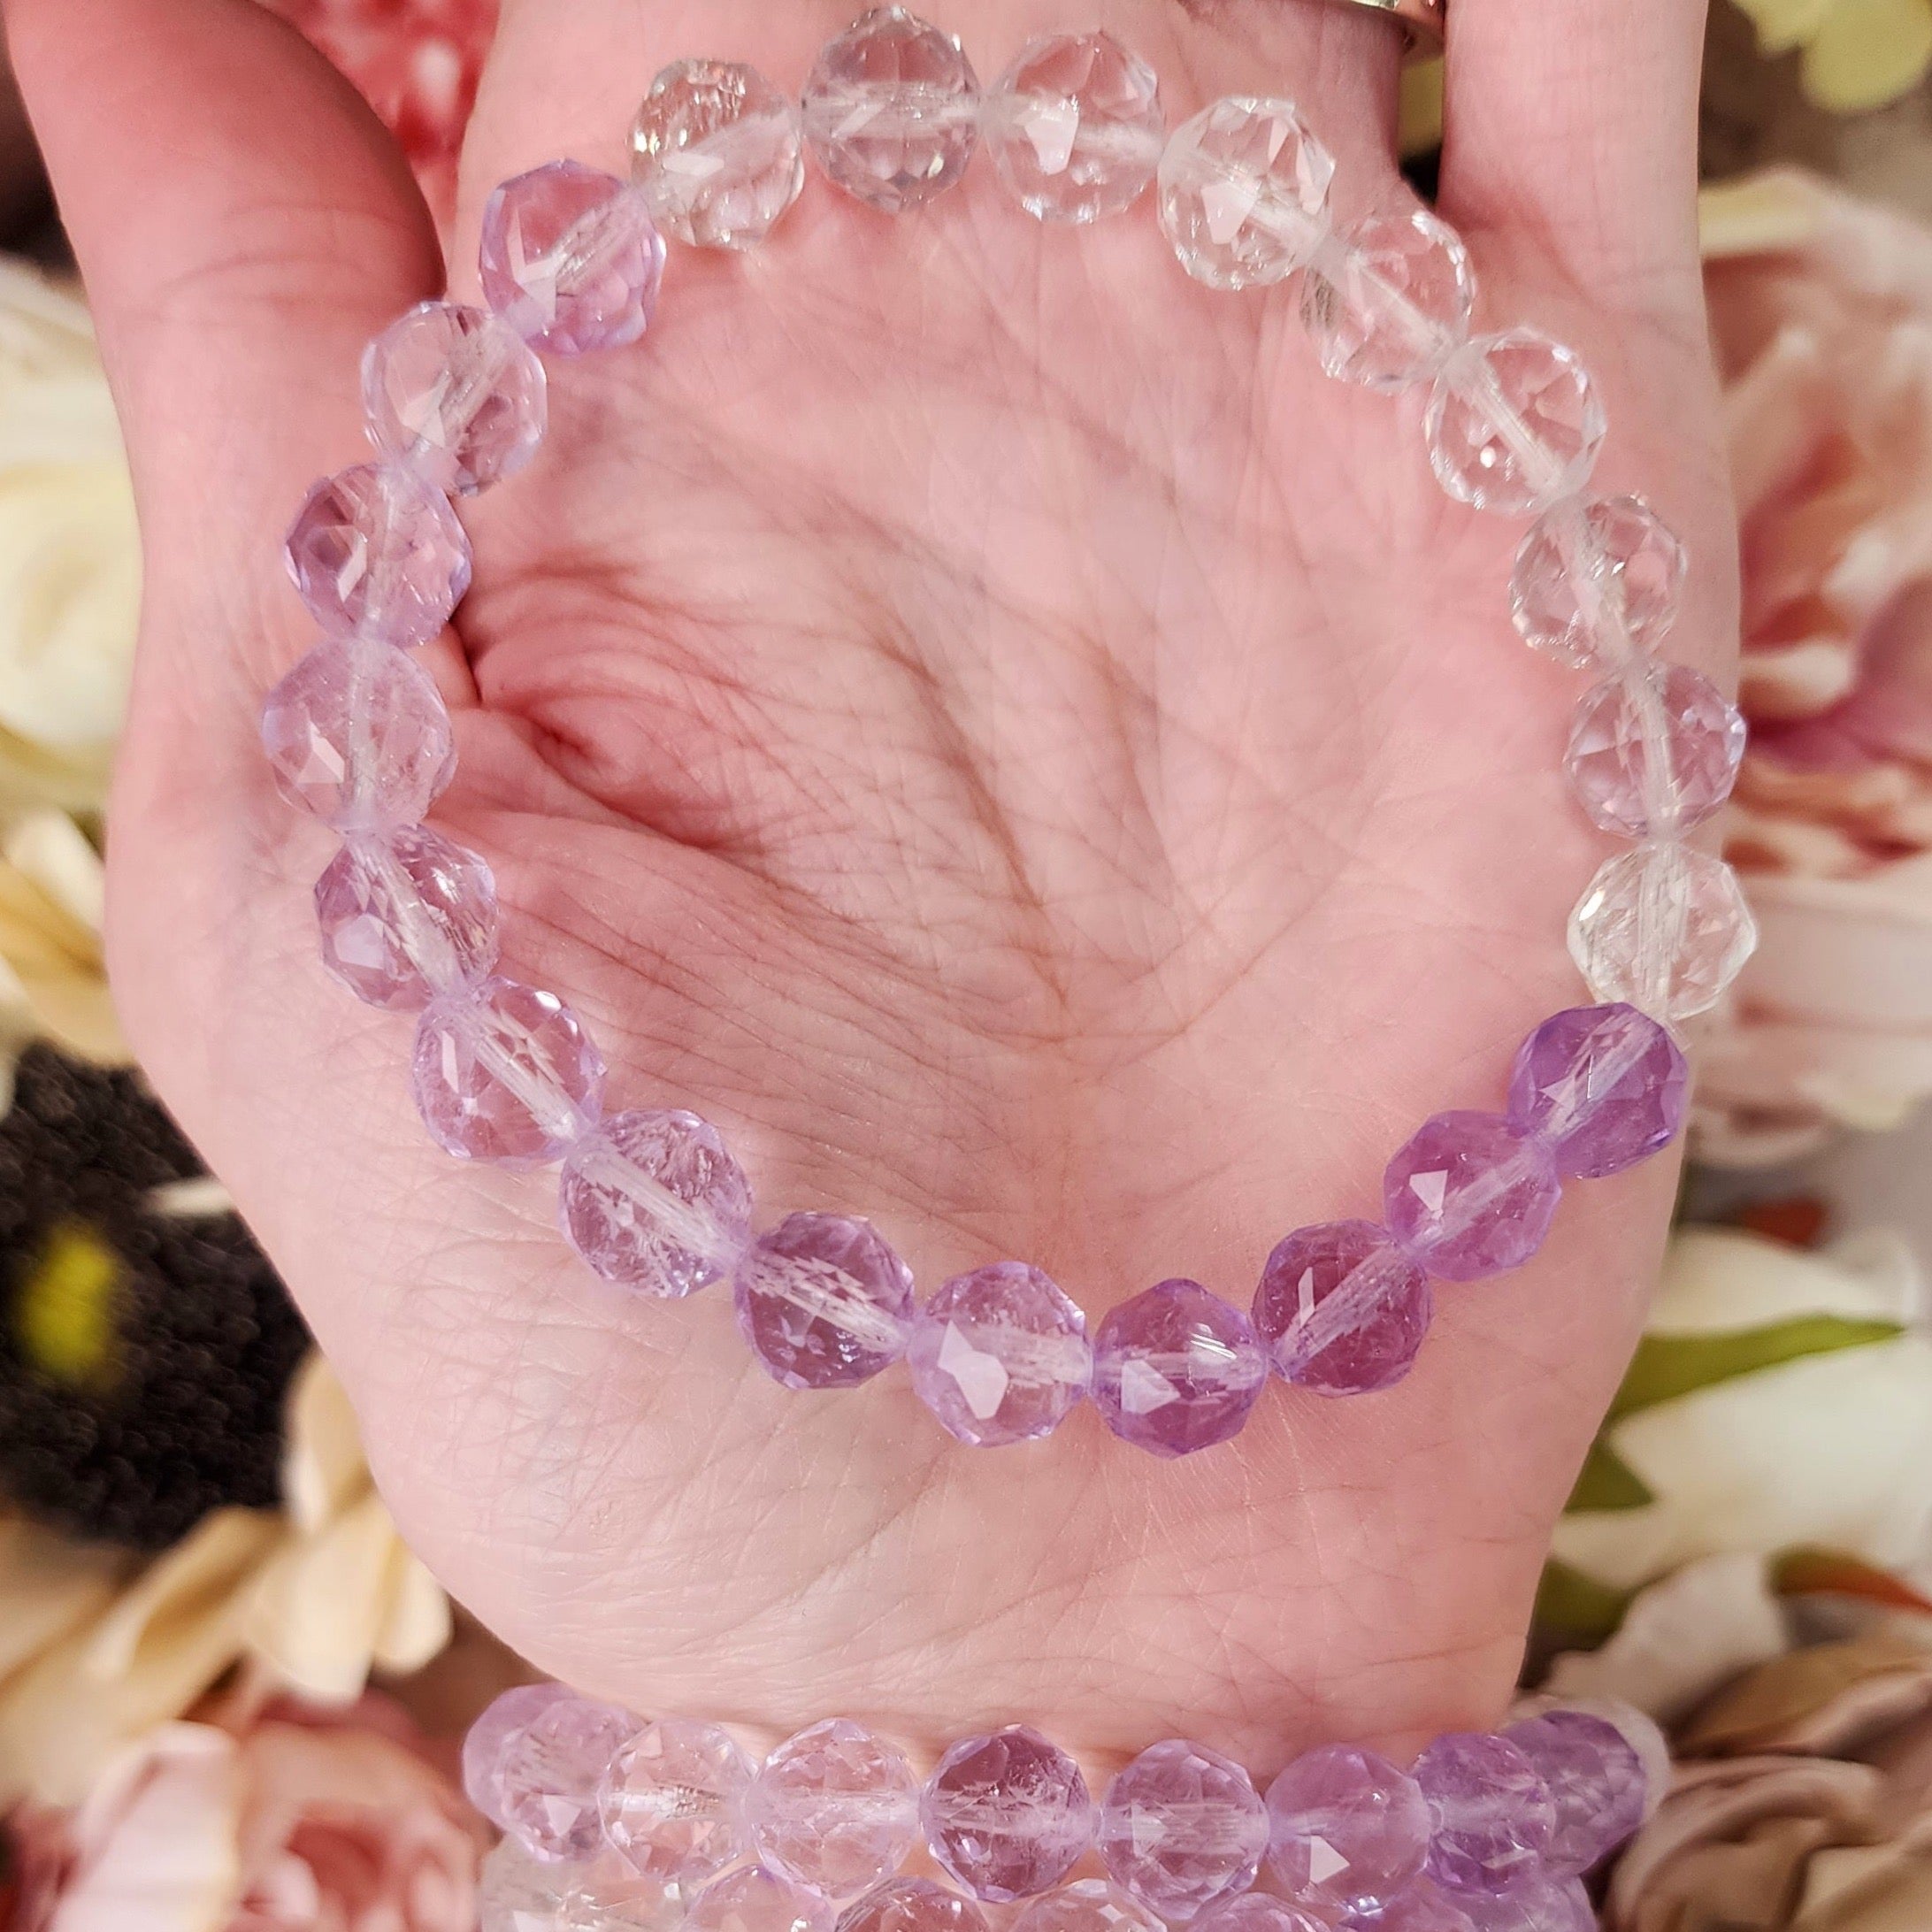 Amethyst Faceted Waterfall Bracelet for Intuition, Connection with the Divine and Sobriety